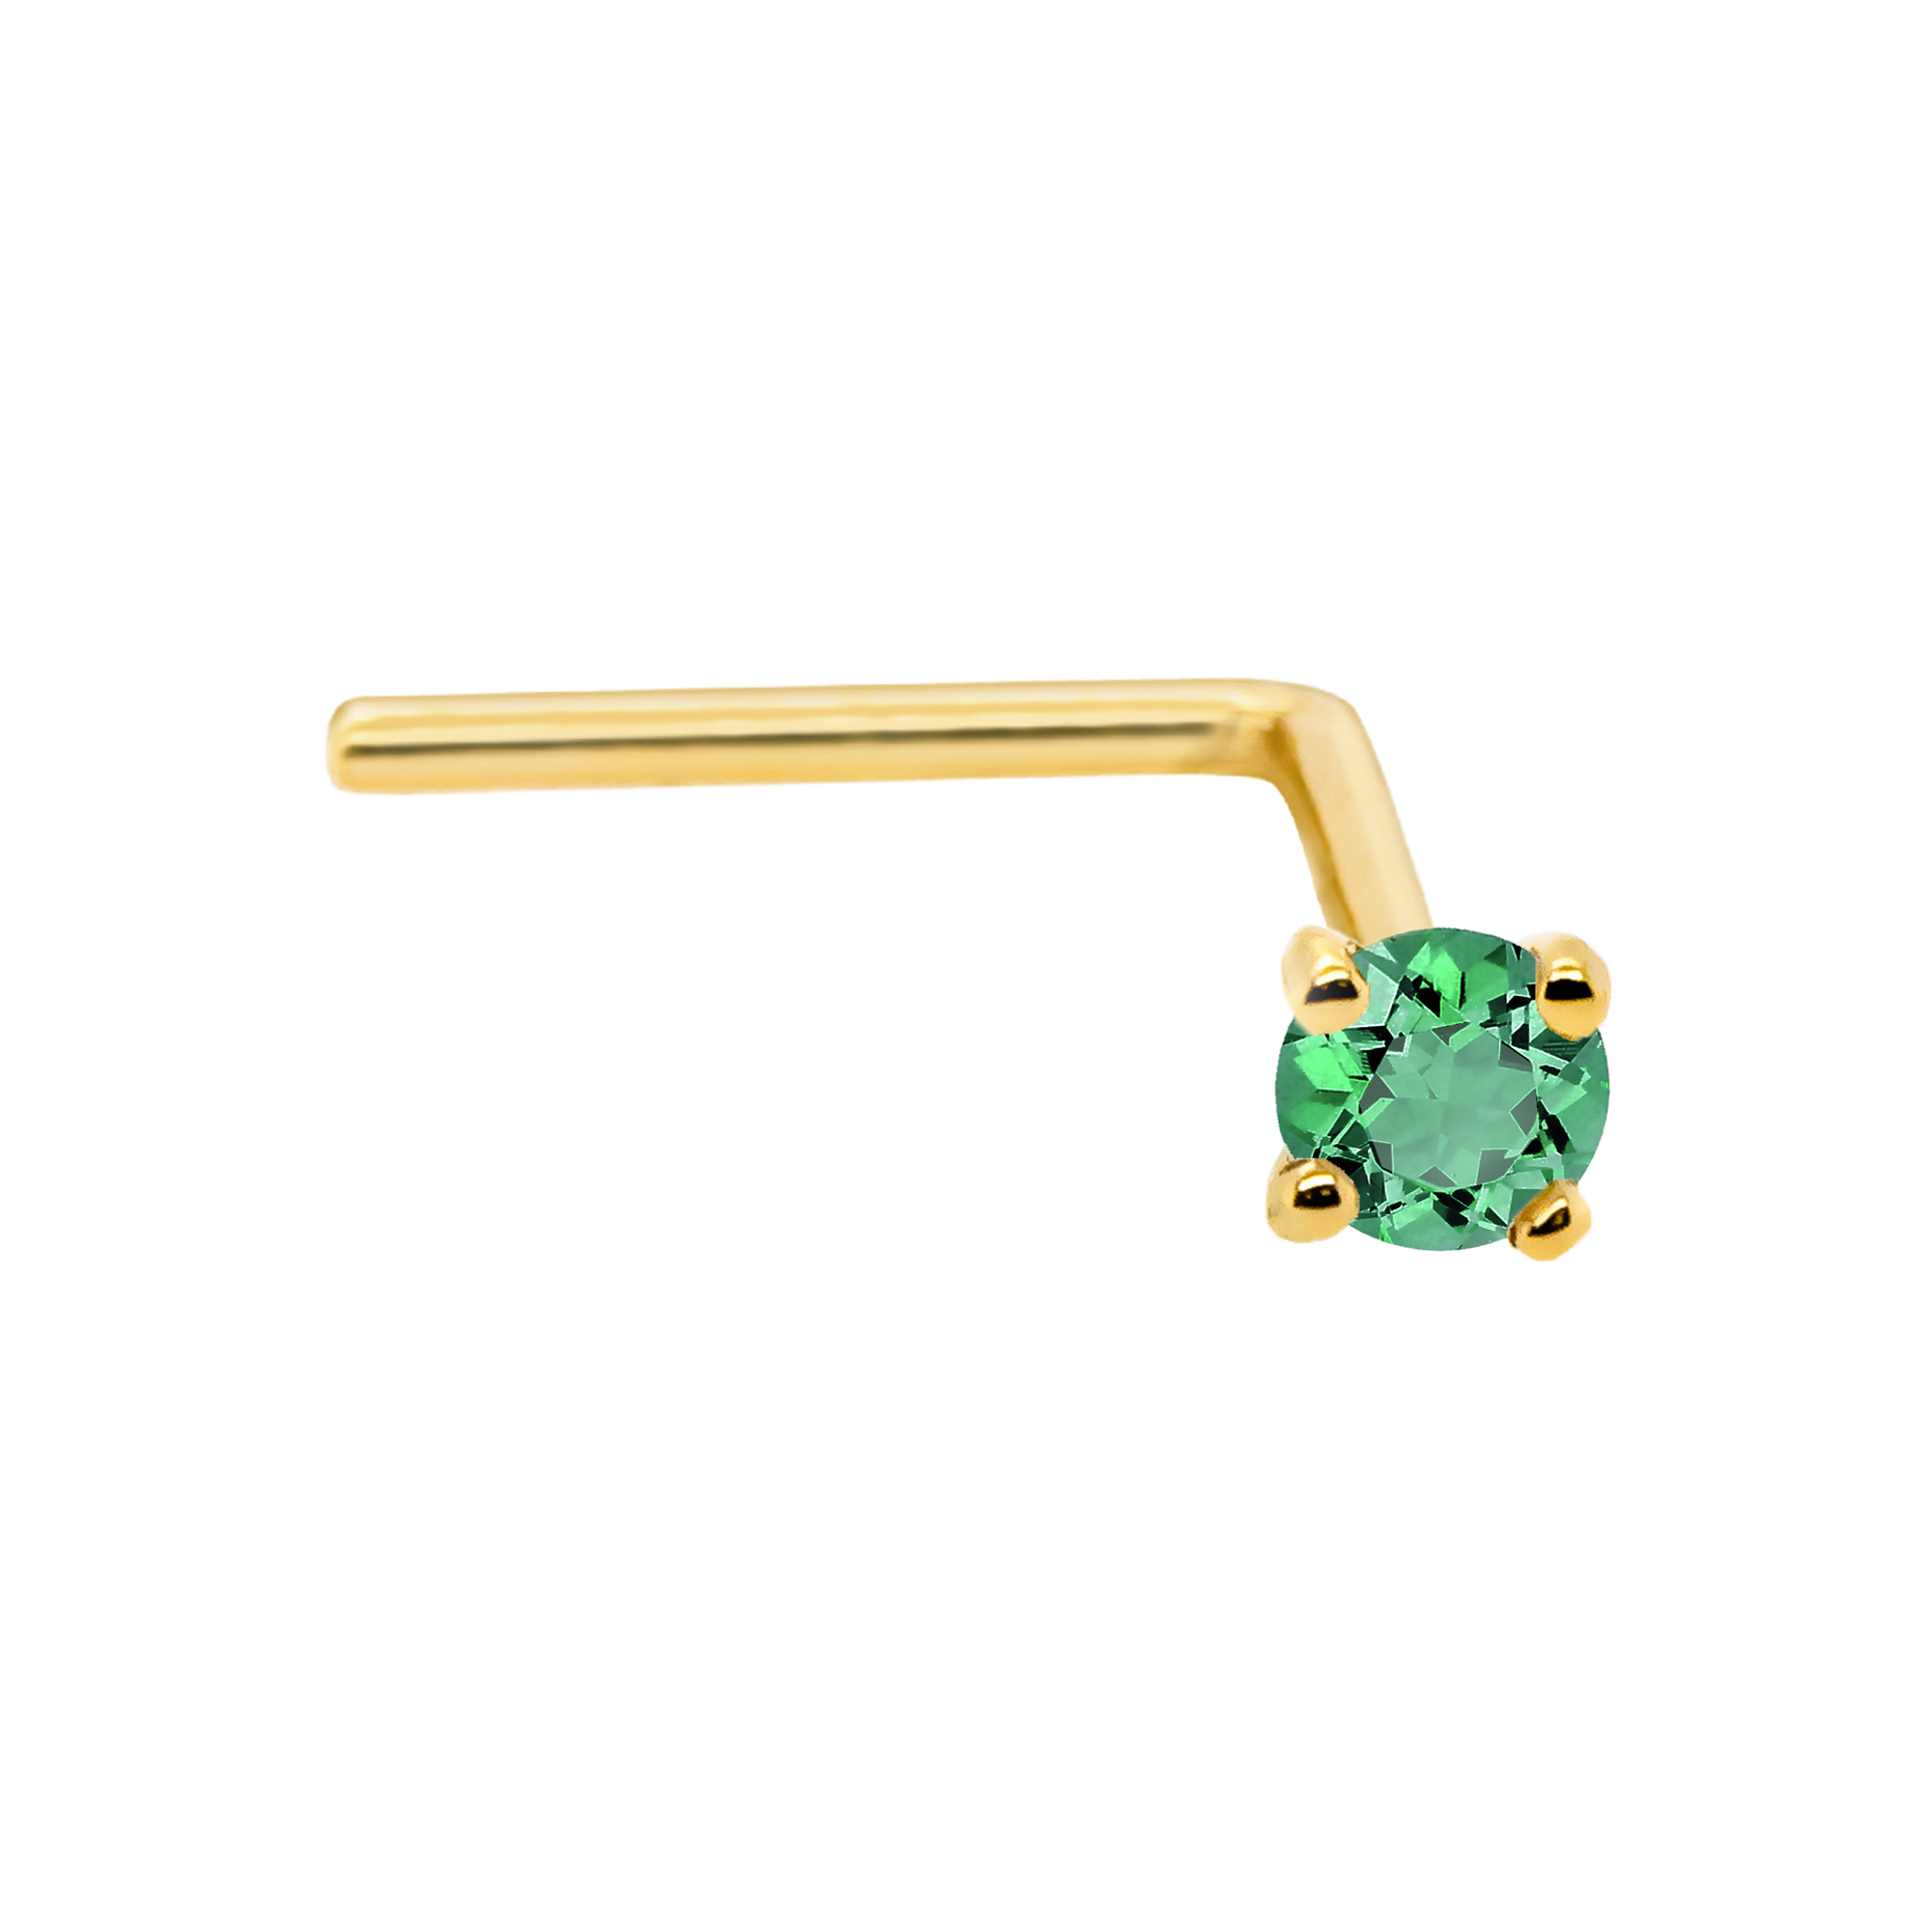 22G Solid 14Kt Gold L-Shape Nose Stud with real Emerald Gemstone, 14kt Yellow Gold or 14kt White Gold Prong Setting - May Birthstone Nose Ring